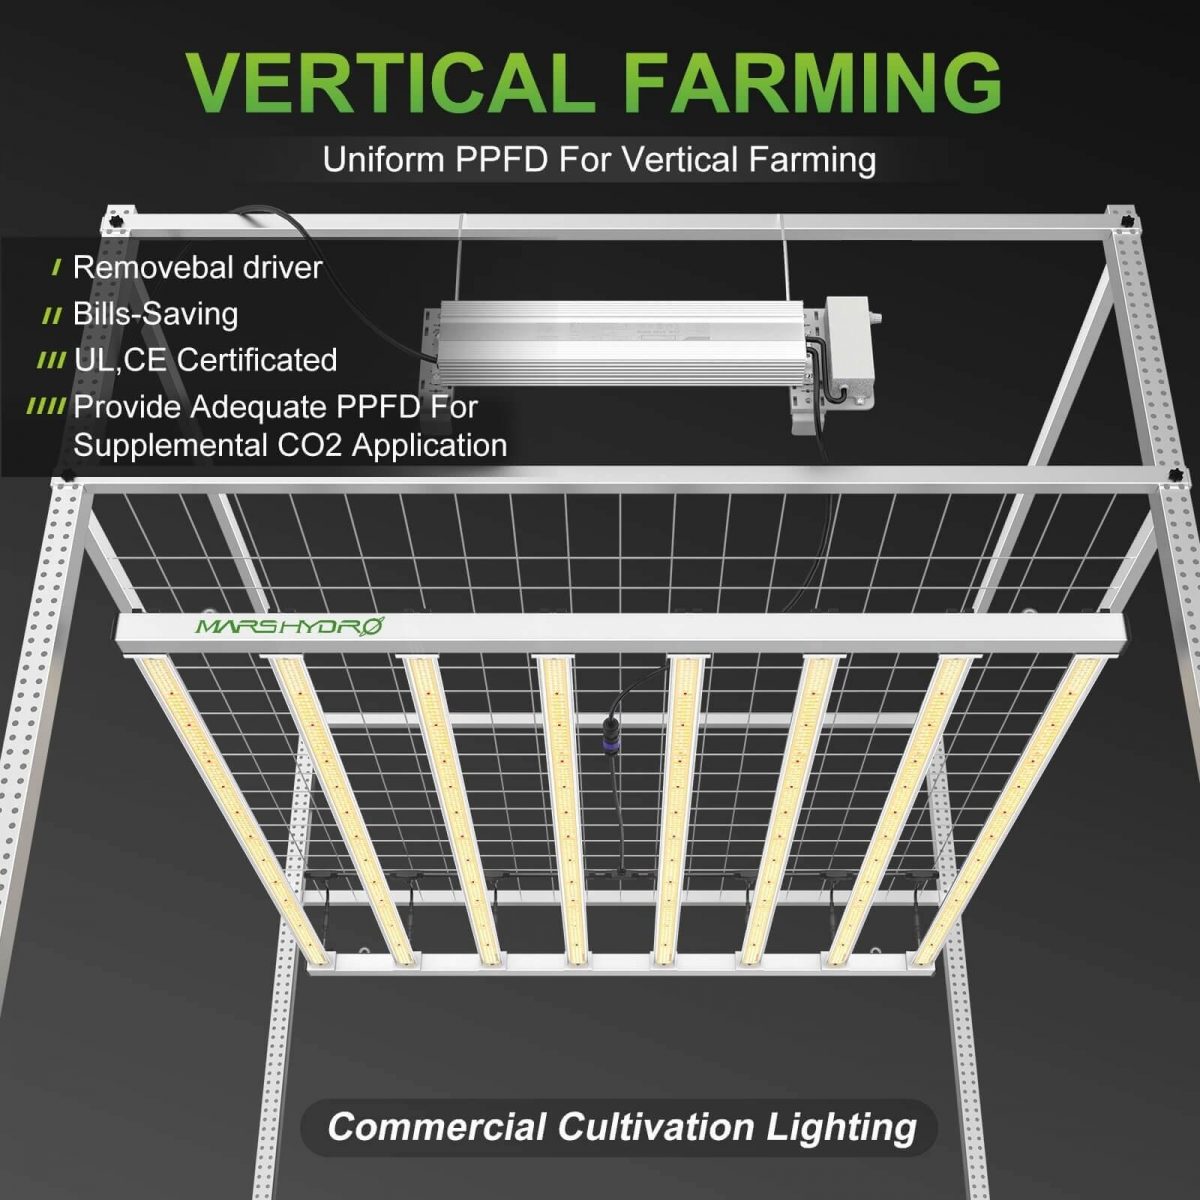 Mars Hydro FC-E8000 is born as commercial cultivation lighting, and its uniform PPFD is optimal for vertical farming and multi-rackings with supplemental co2